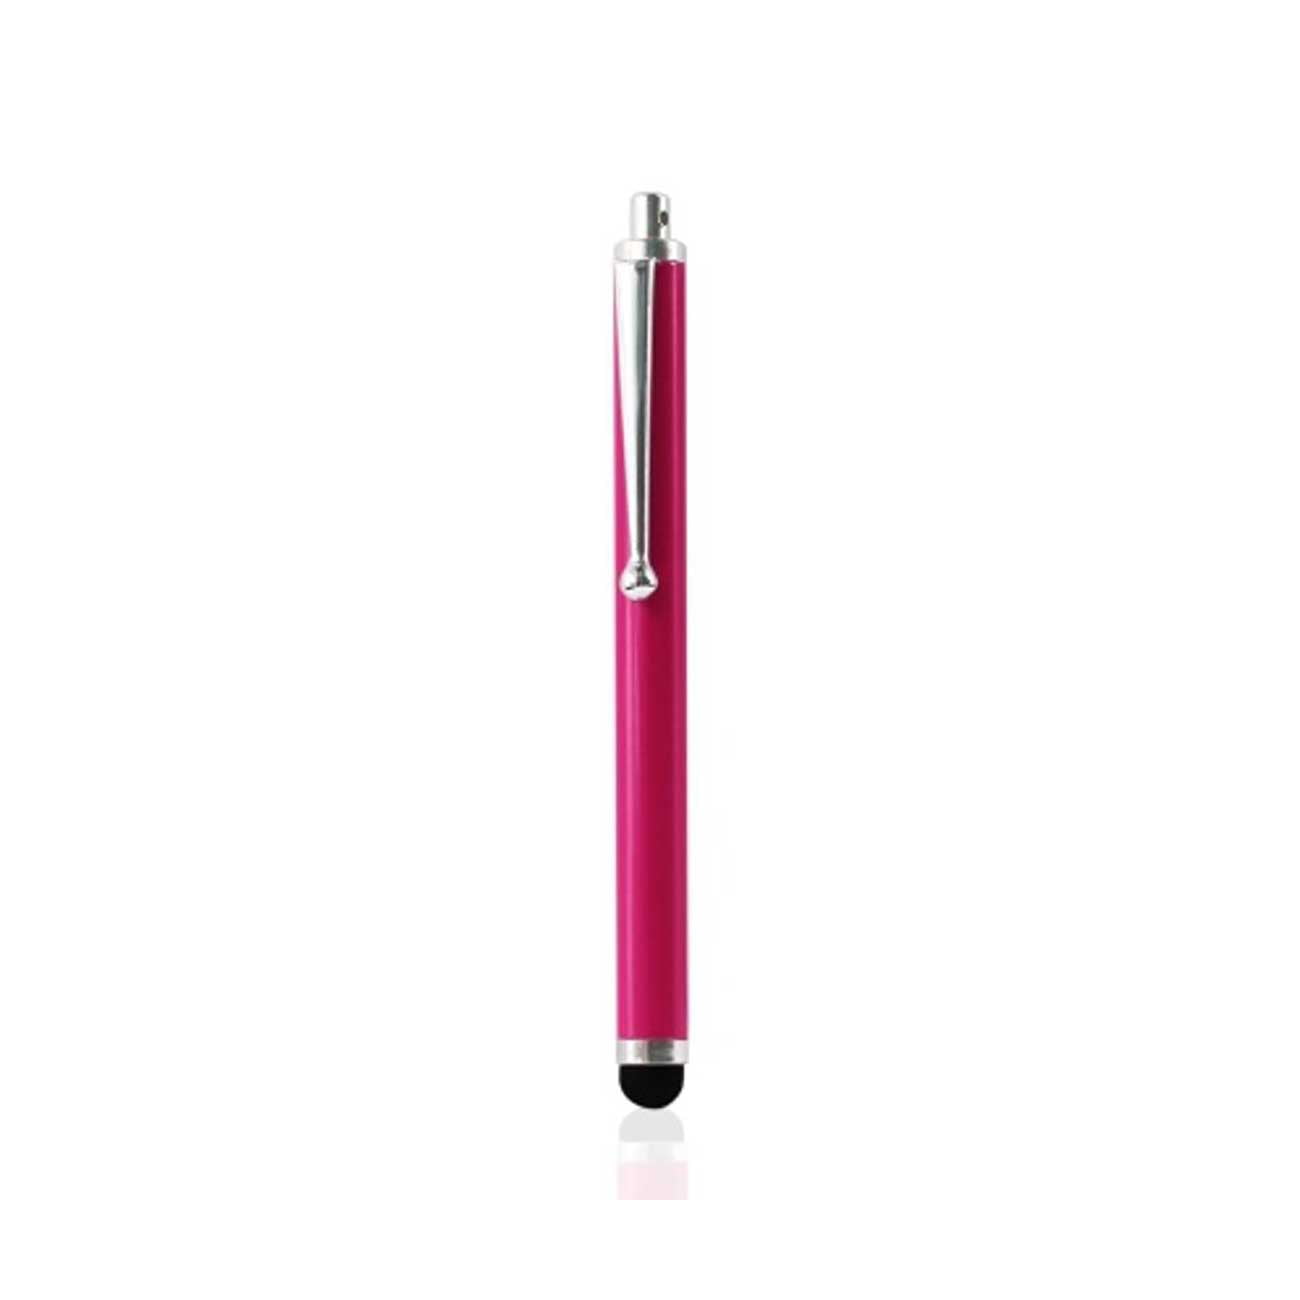 2 in 1 Stylus for Touchscreen Devices with Ballpoint Pens 12 Pack Pink